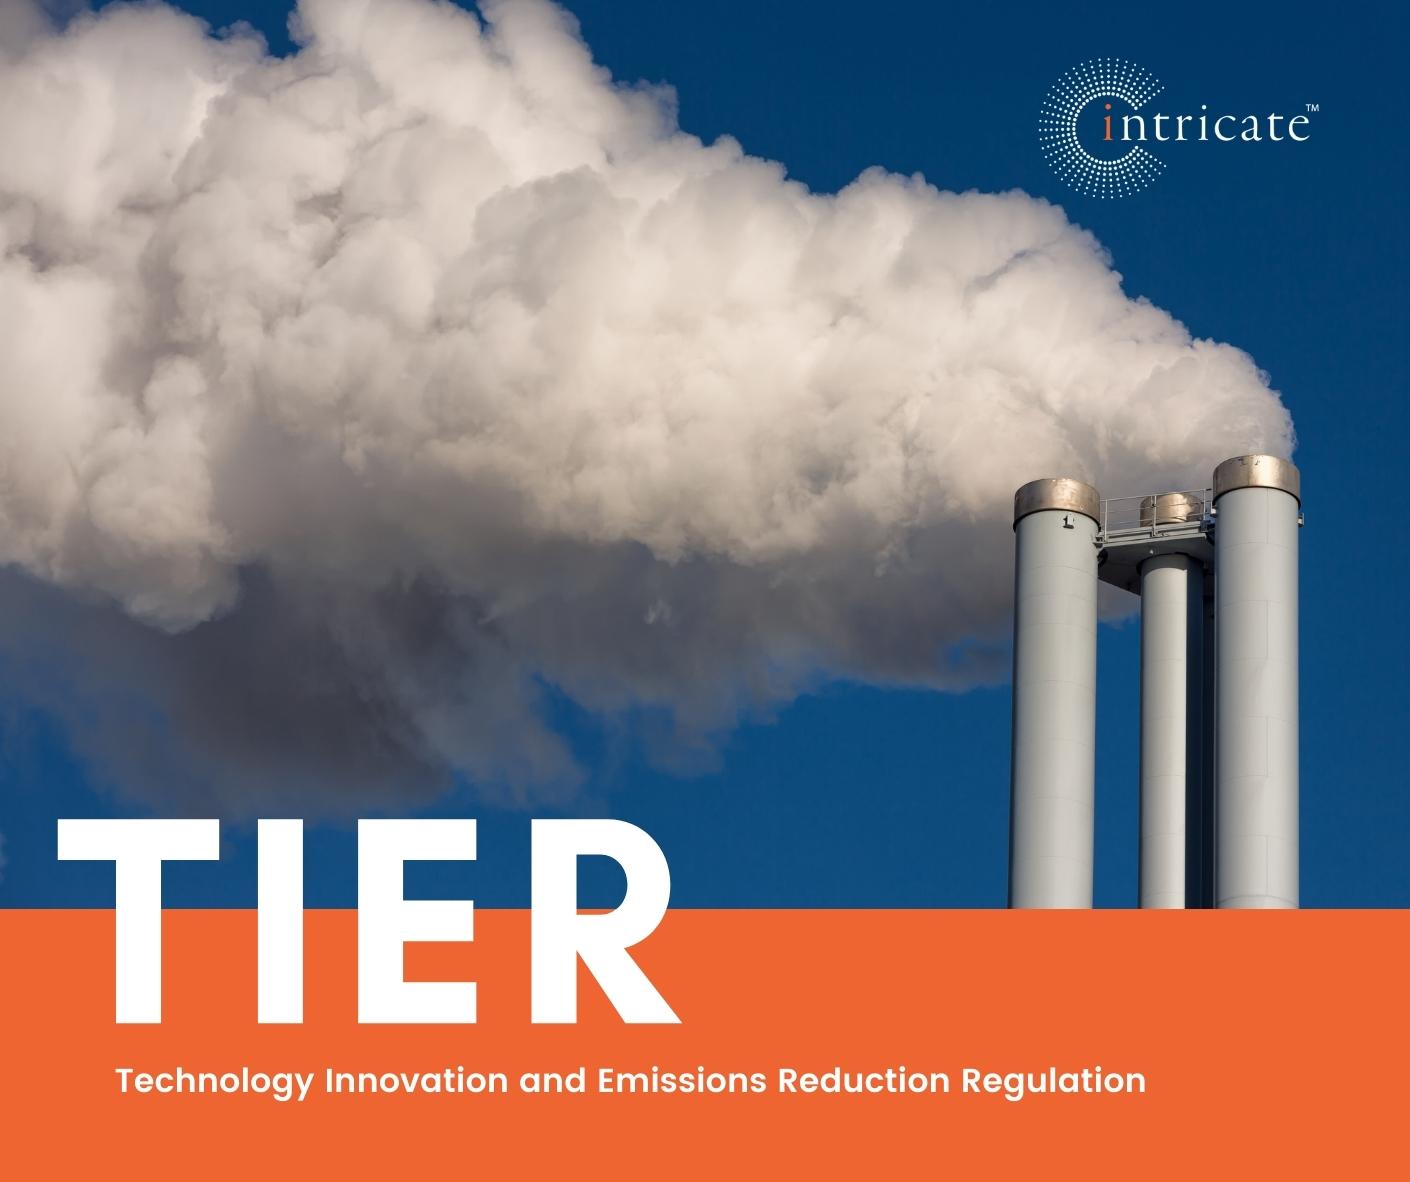 Technology Innovation and Emissions Reduction Regulation